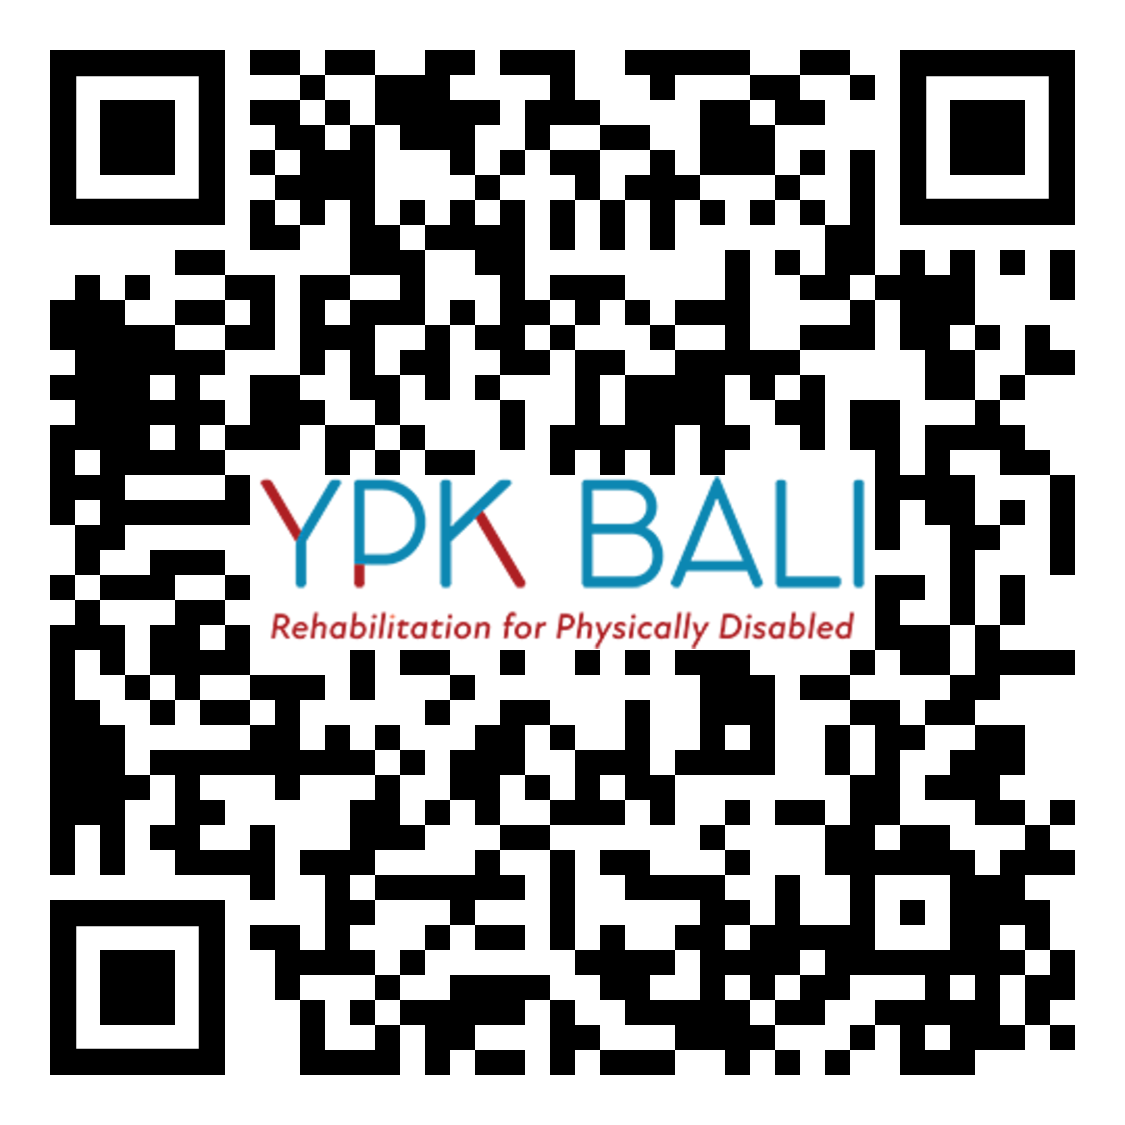 Make a Donation to YPK Bali on WeCare.id